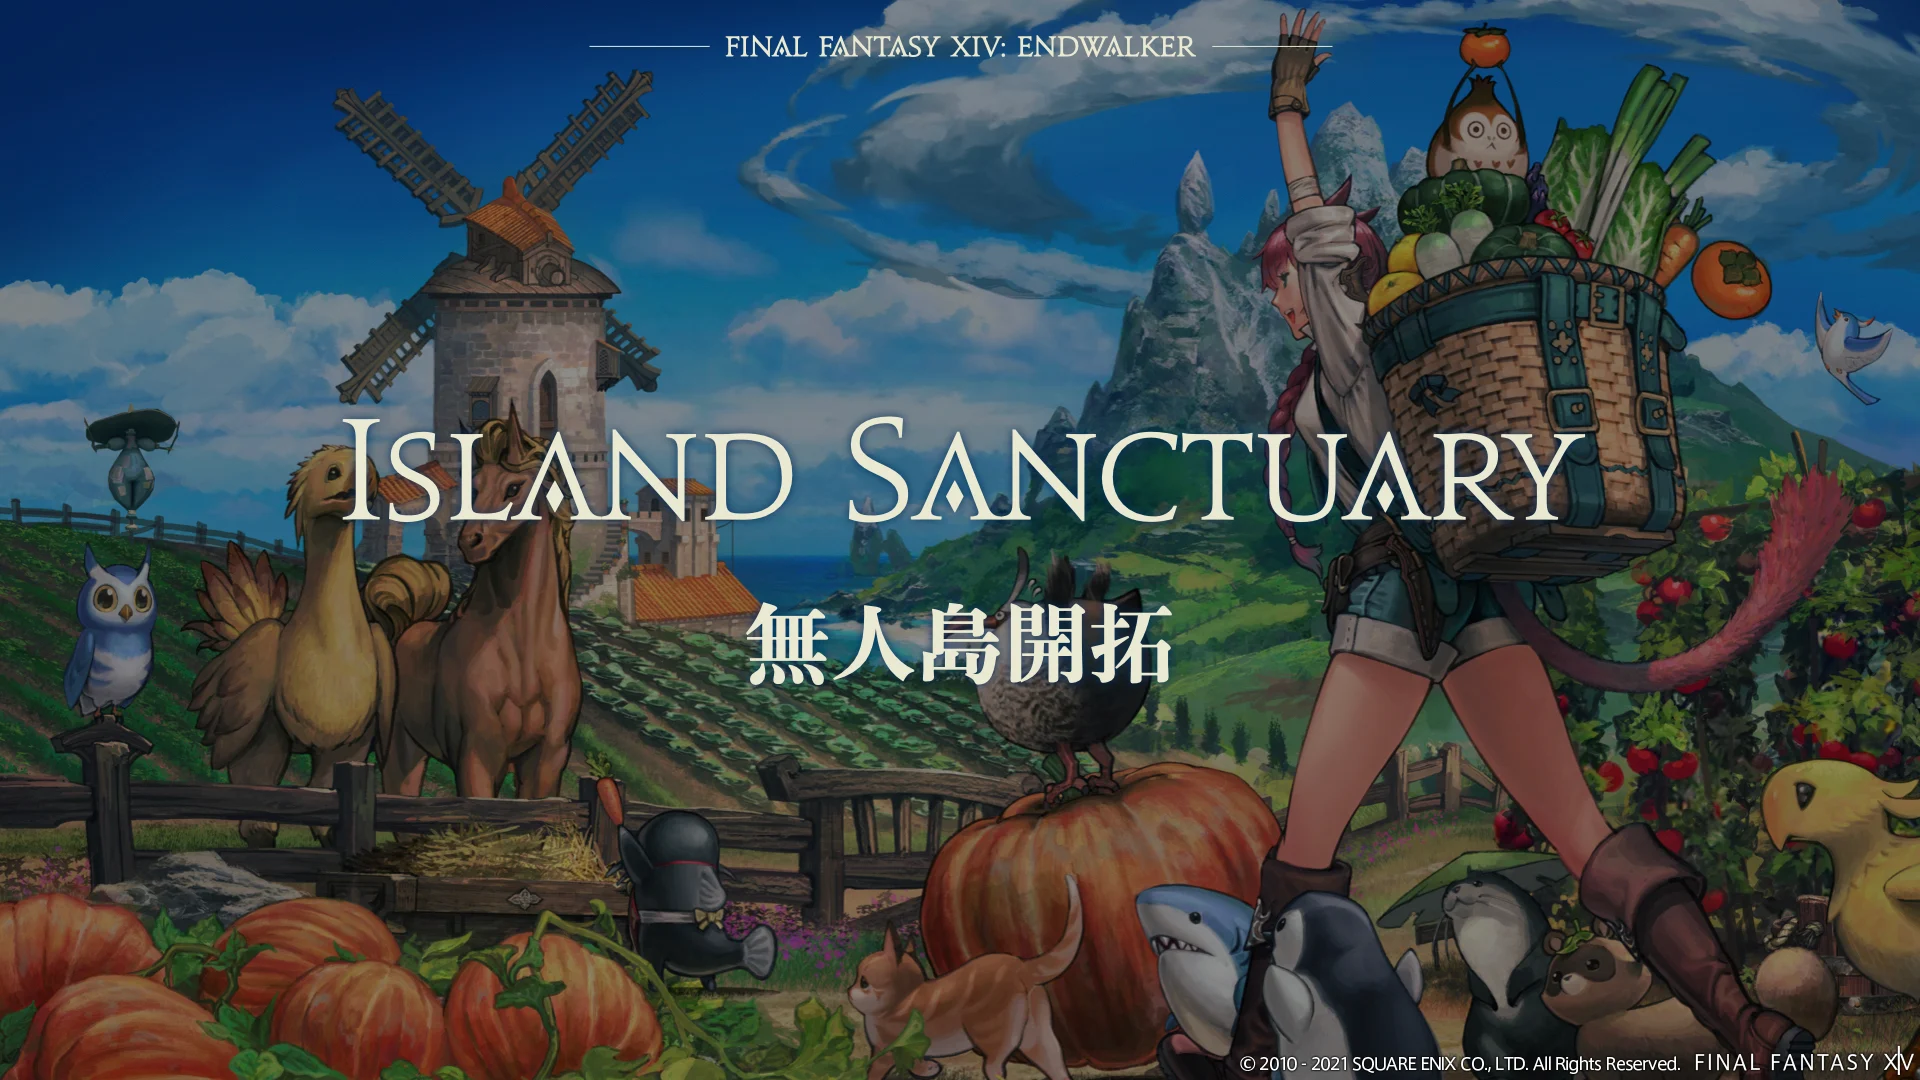 Island Sanctuary in FFXIV - What We Know So Far 6